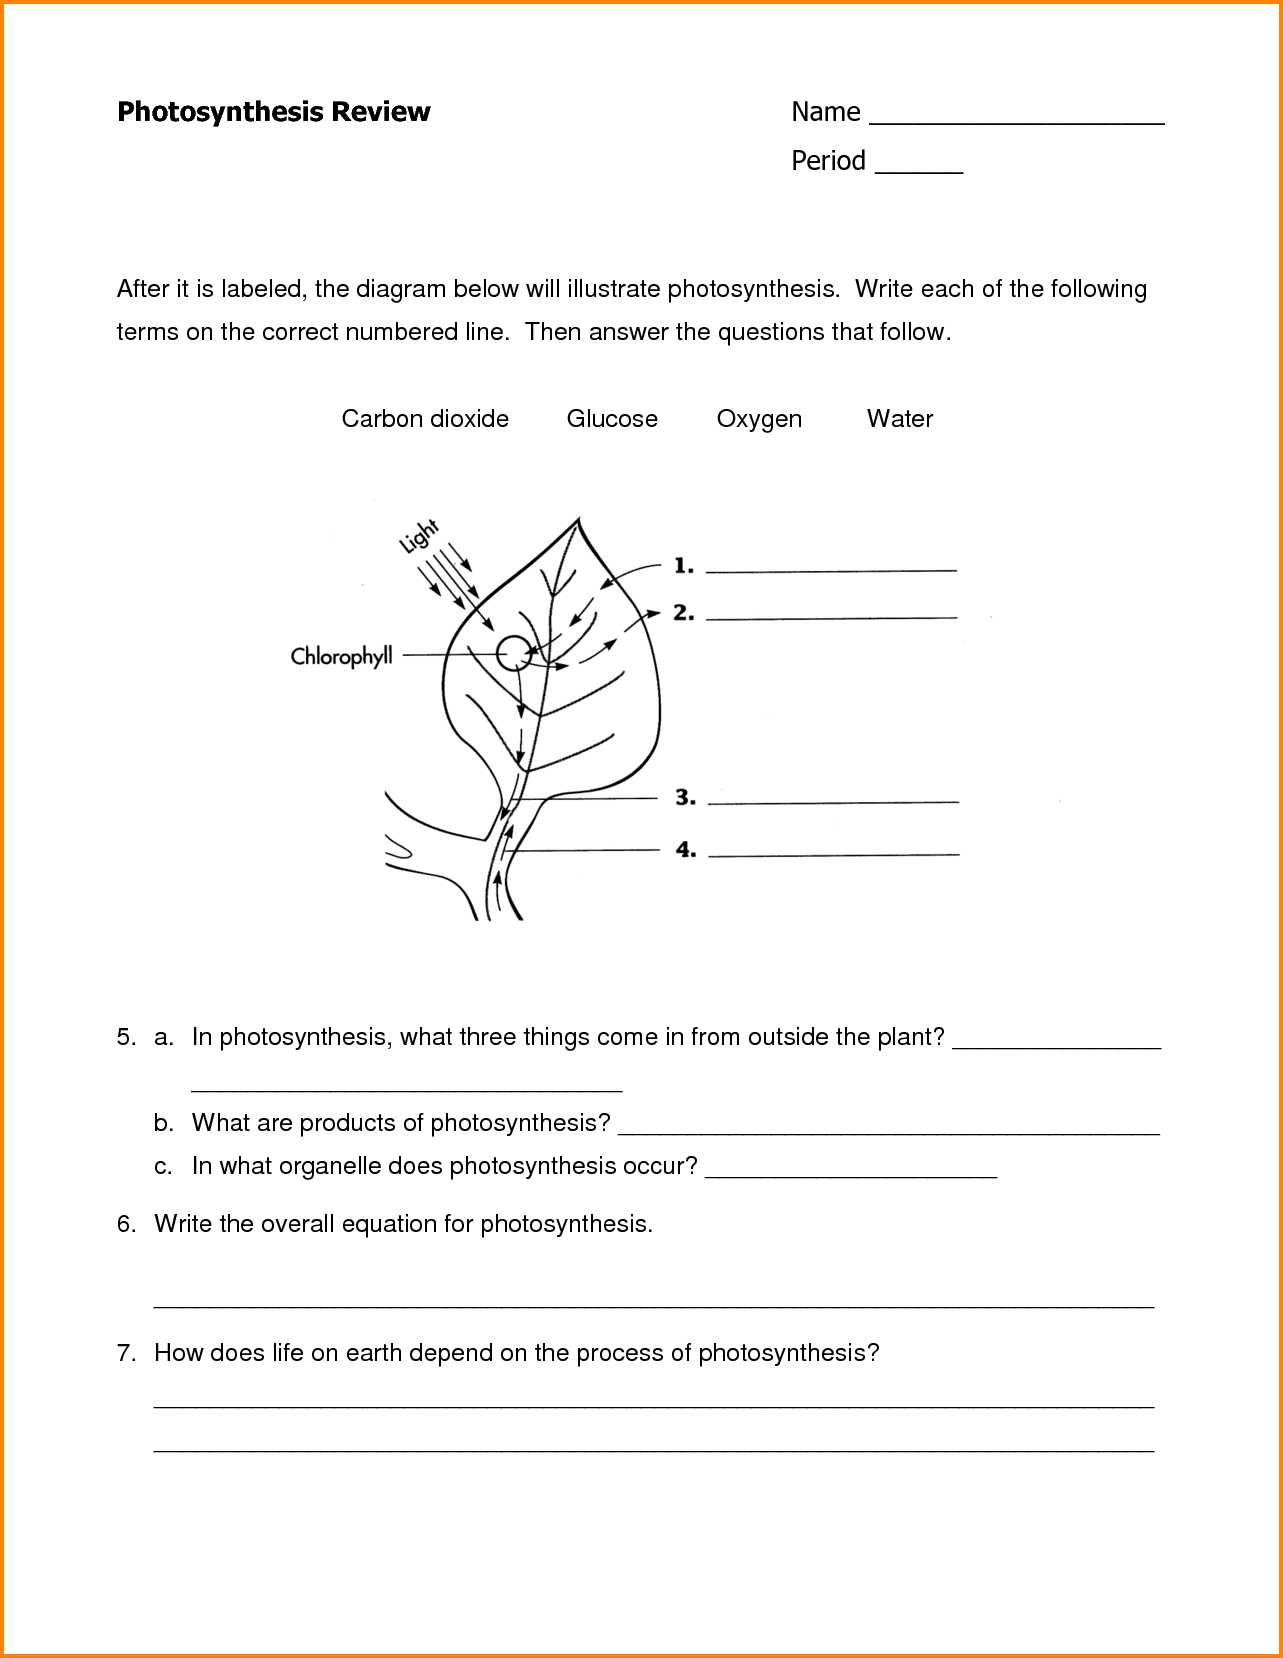 Role Of Photosynthesis In Carbon Cycling Worksheet together with Differentiated Synthesis Reading Passage Crossword Puzzle